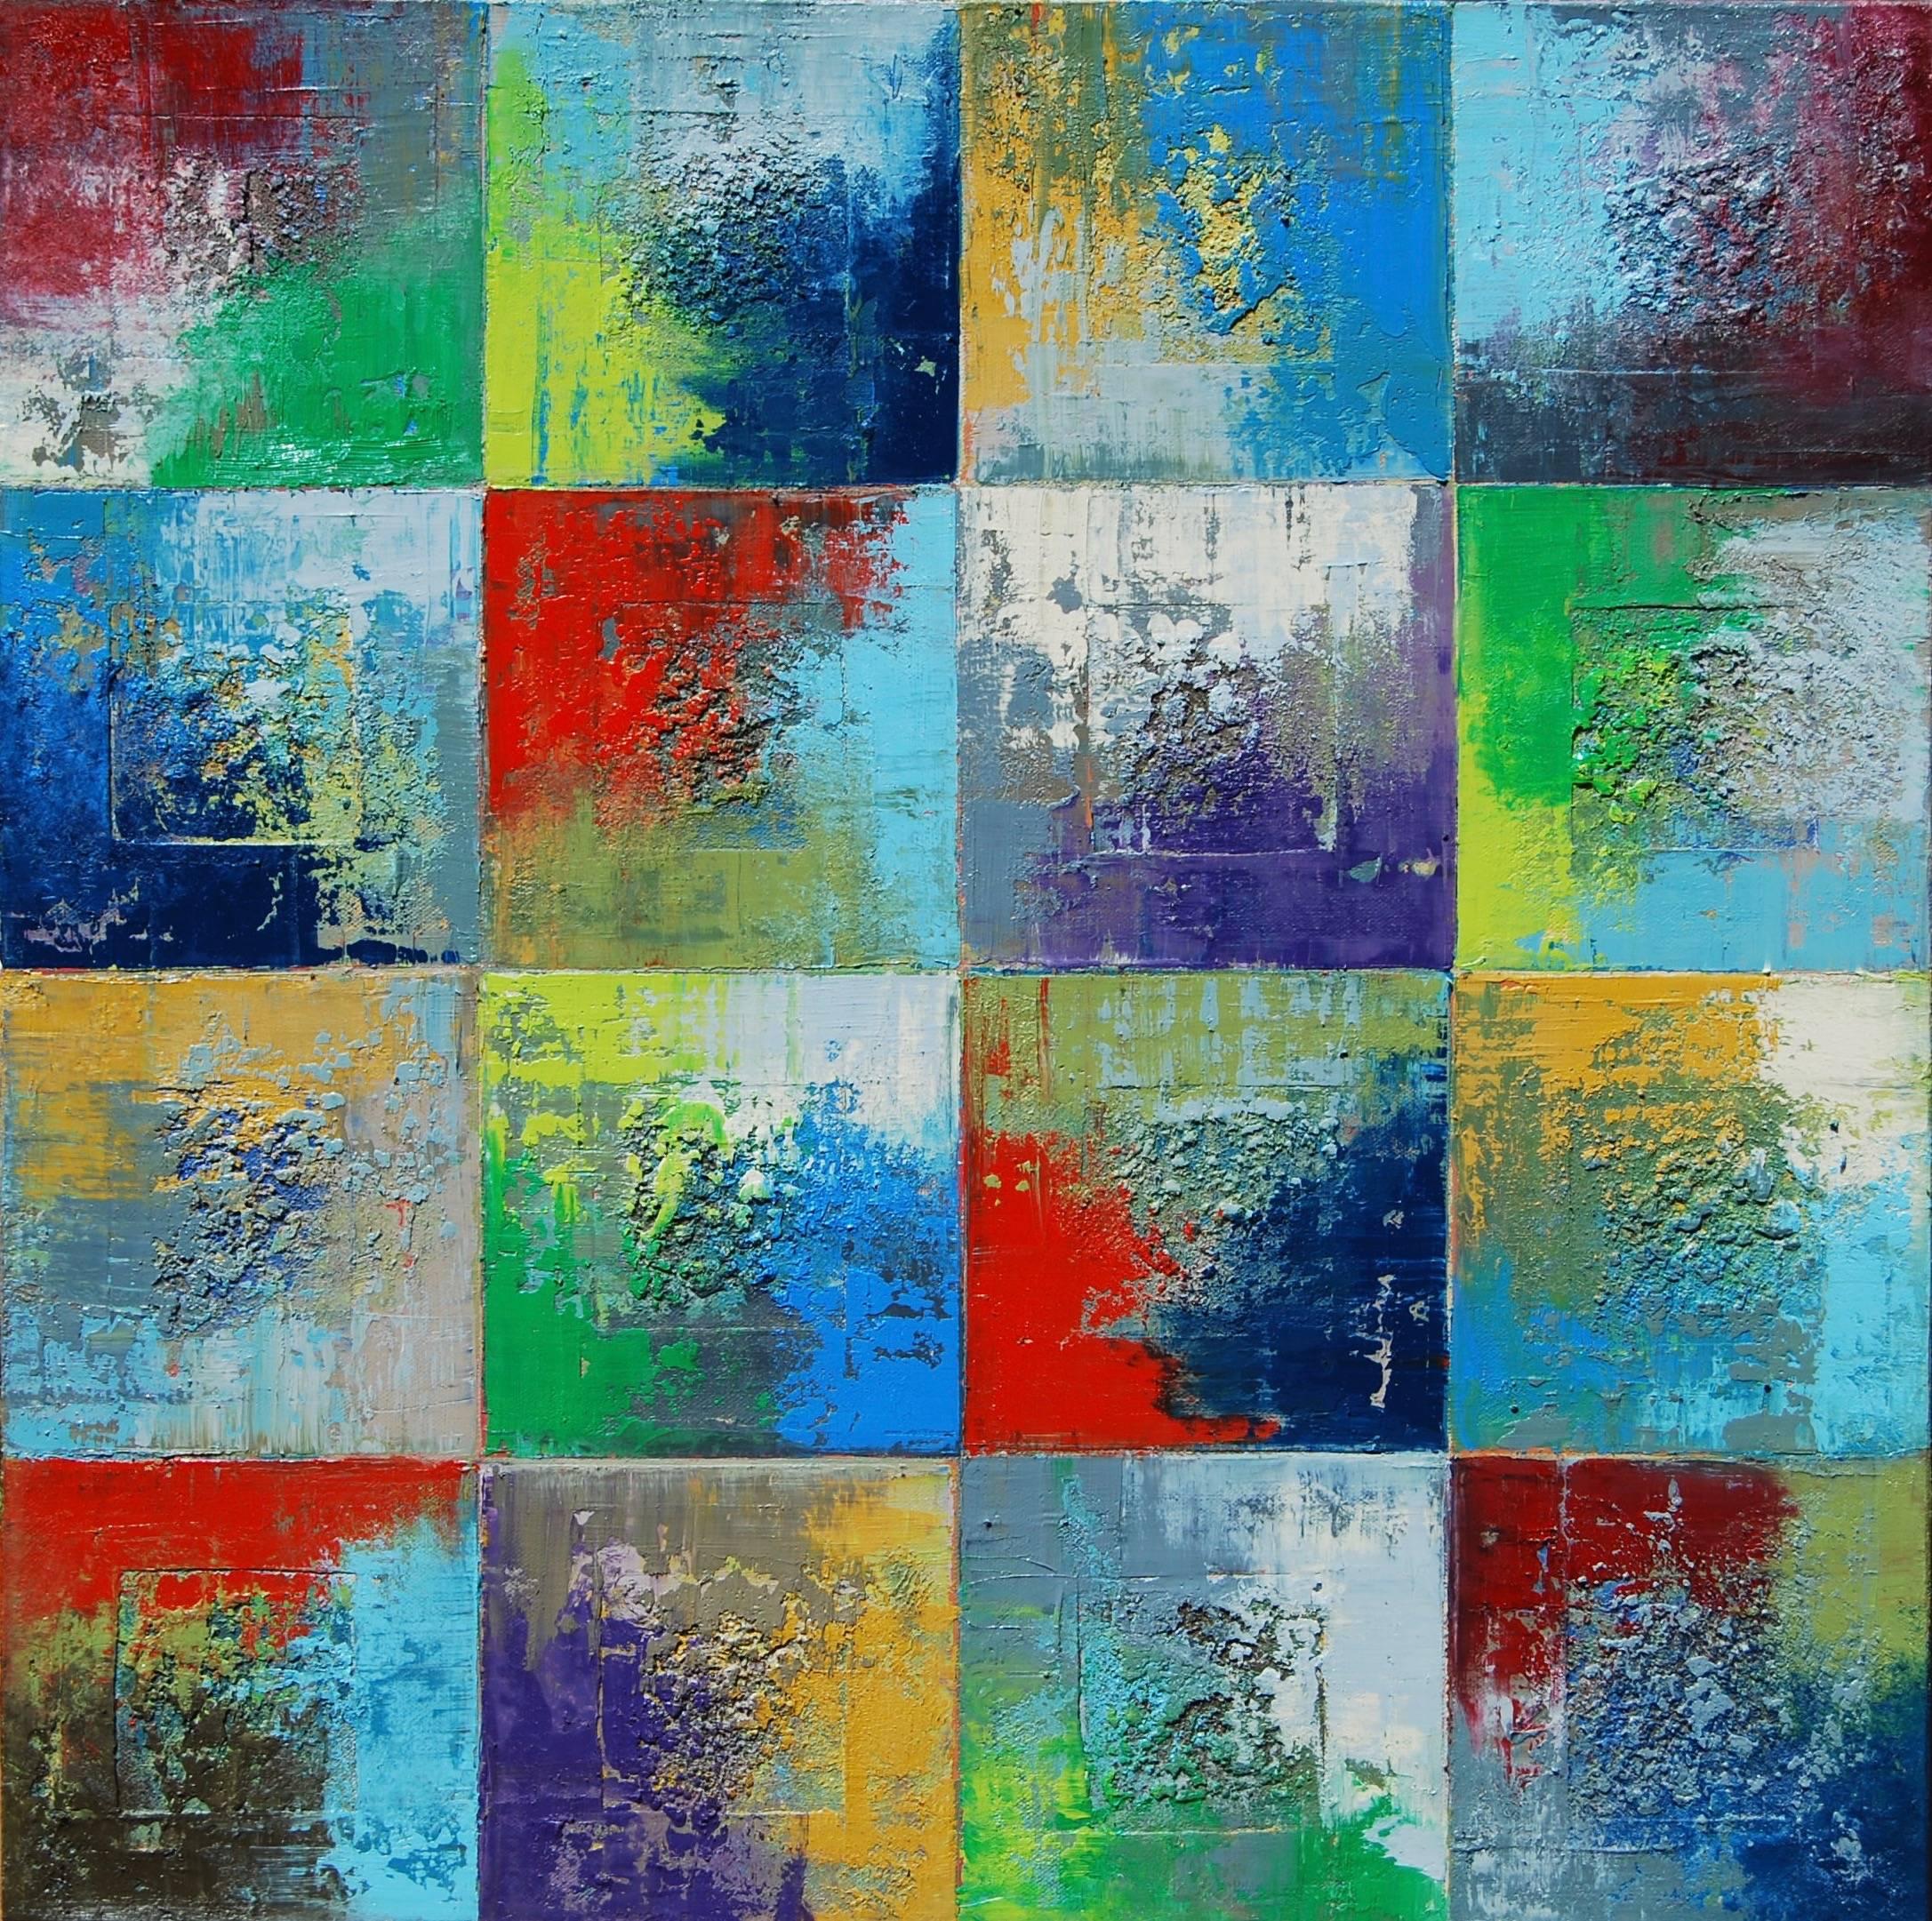 Squares 24 Janet Hamilton Oil painting on stretched canvas
One-of-a-kind
Signed on back
2017
24 in. h x 24 in. w x 1.5 in. d
3 lbs. 4 oz. Artist Comments 
This piece is part of my geometric series. It is painted on a gallery wrapped canvas, with